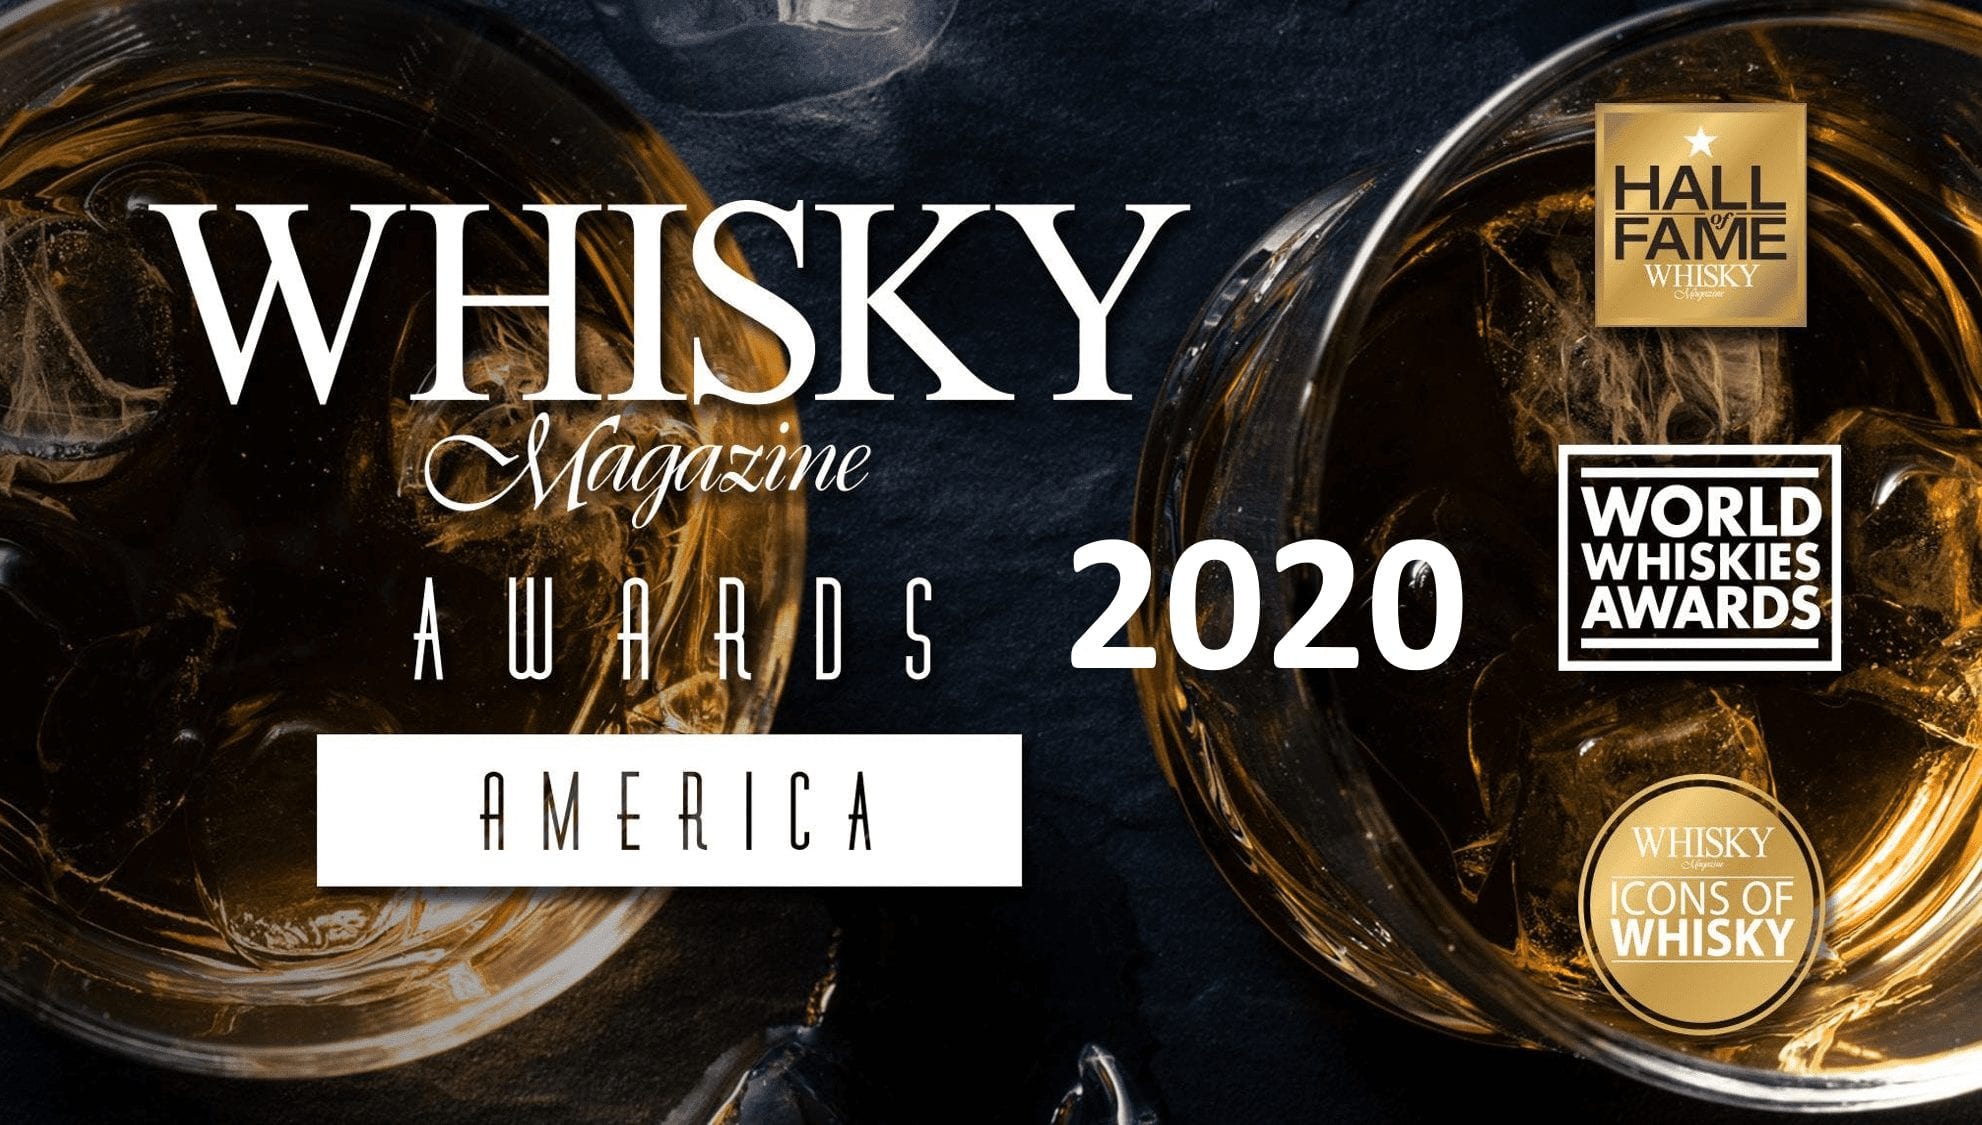 2020 American Whiskey Awards ceremony; and the winner is…